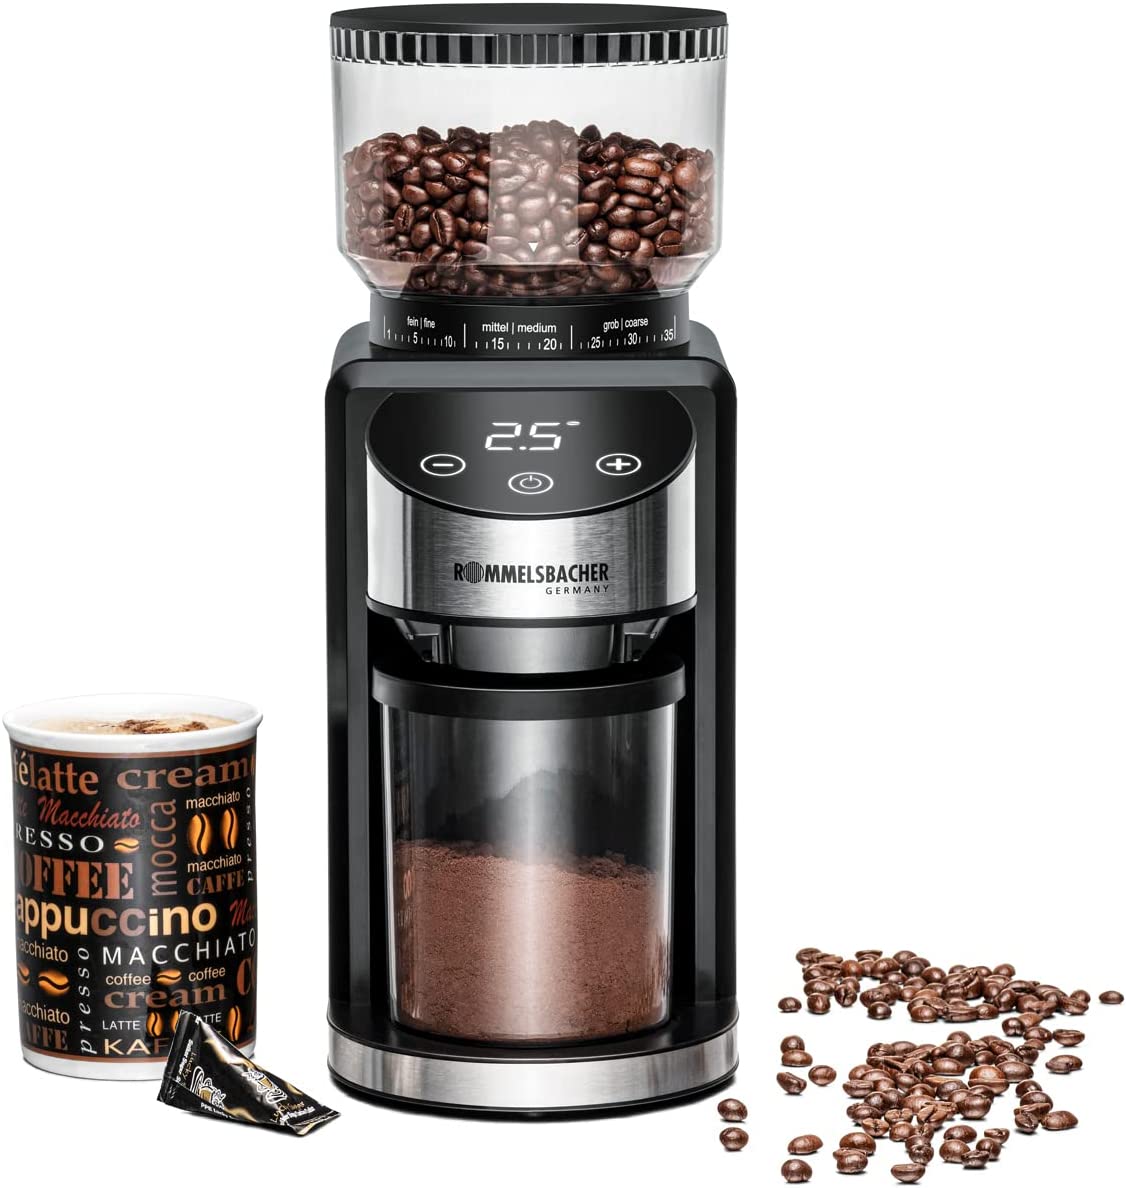 Rommelsbacher EKM 400 Coffee Grinder - Black/Stainless Steel Cone Grinder, Anti-Static Function, 12 Servings, Holder for Filter Holder, Grinding Level in 35 Levels, Bean Container 220 g, Powder Container 130 Watt